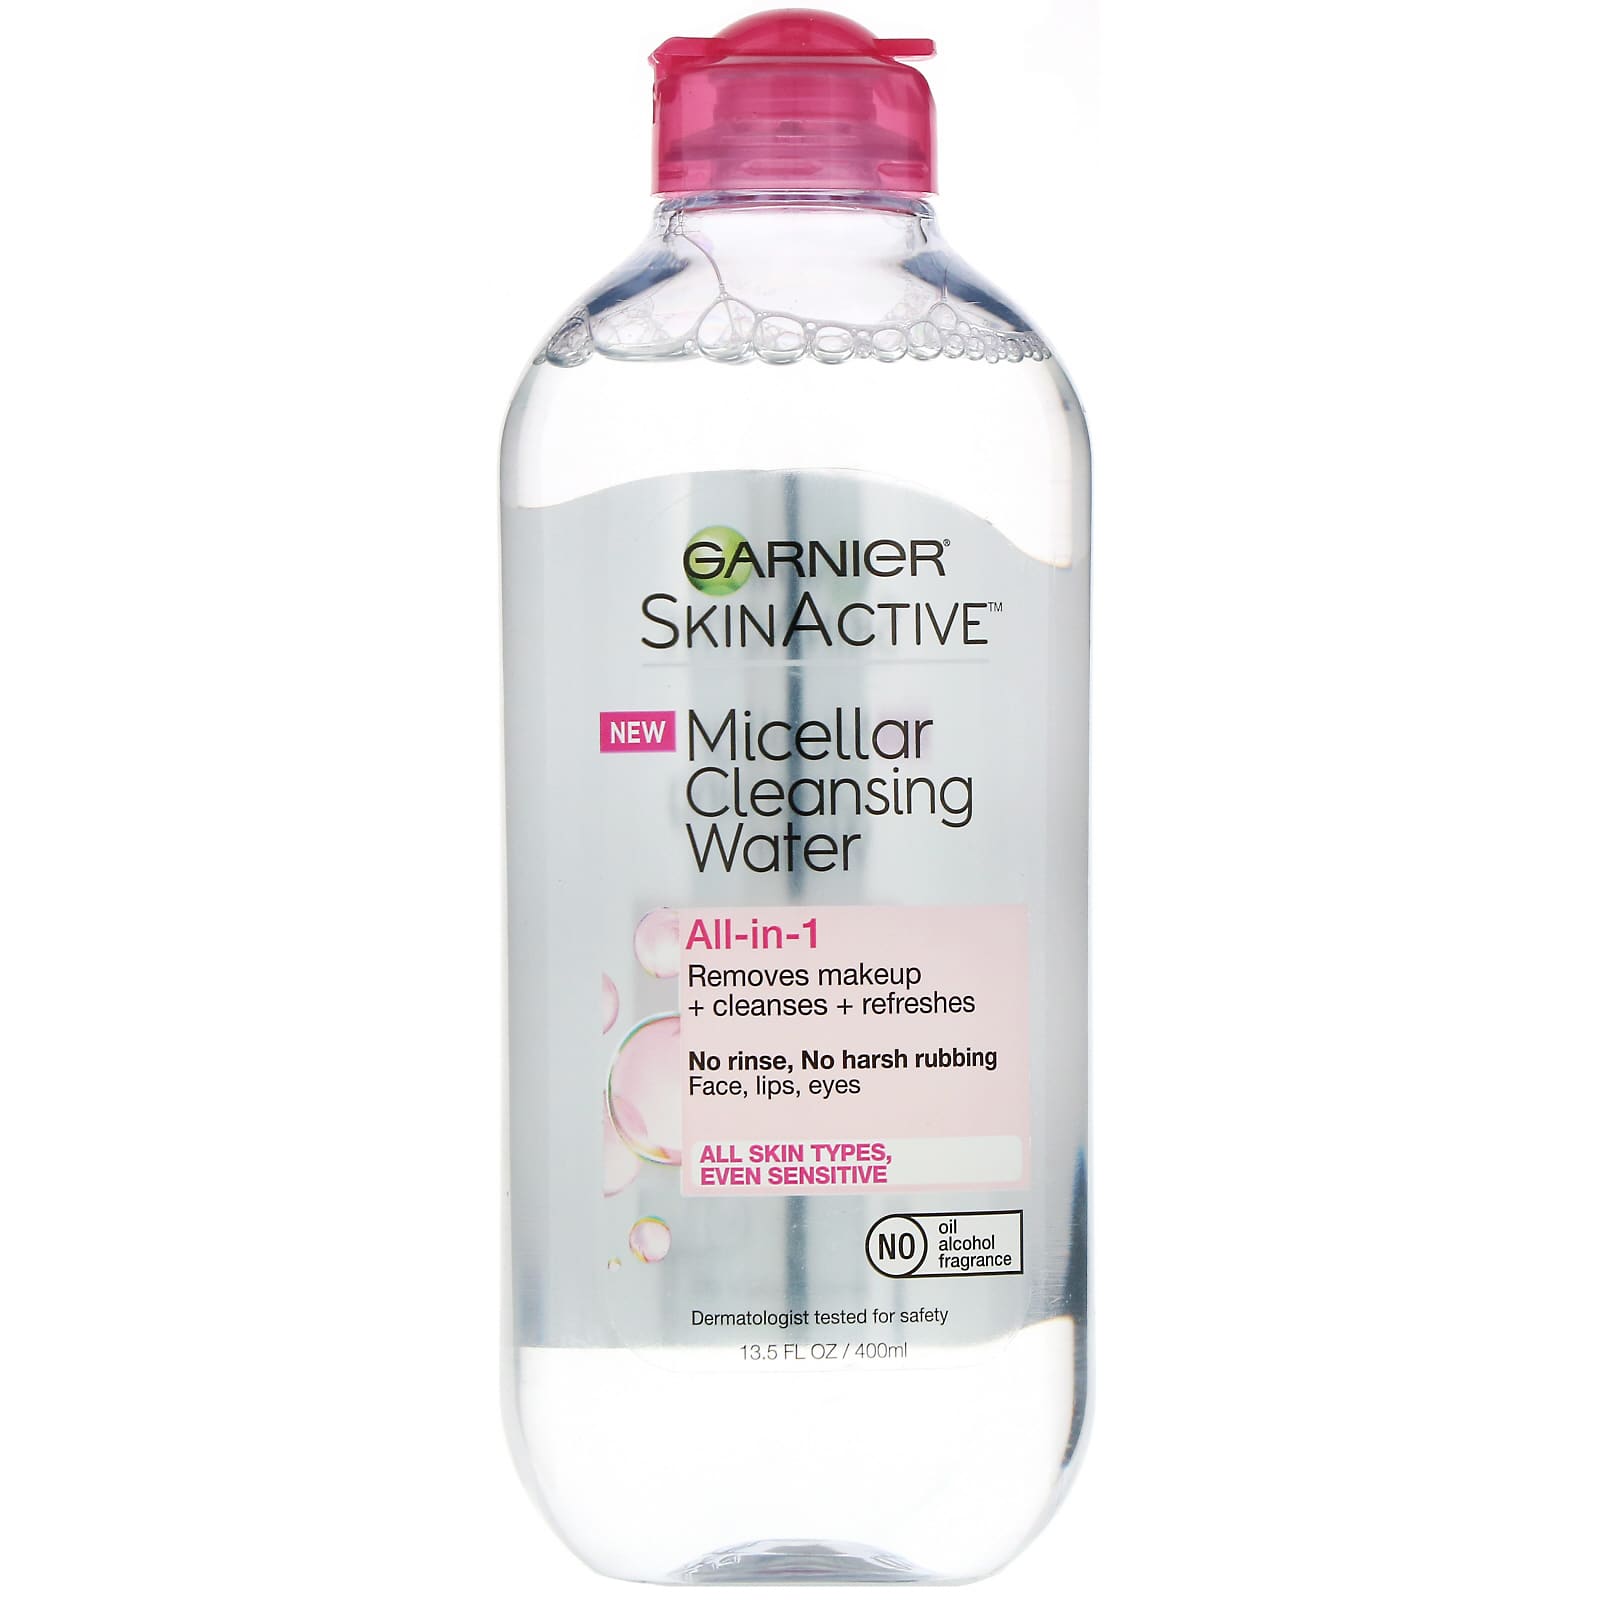 Garnier, SkinActive, Micellar Cleansing Water, All-in-1 Makeup Remover, All Skin Types